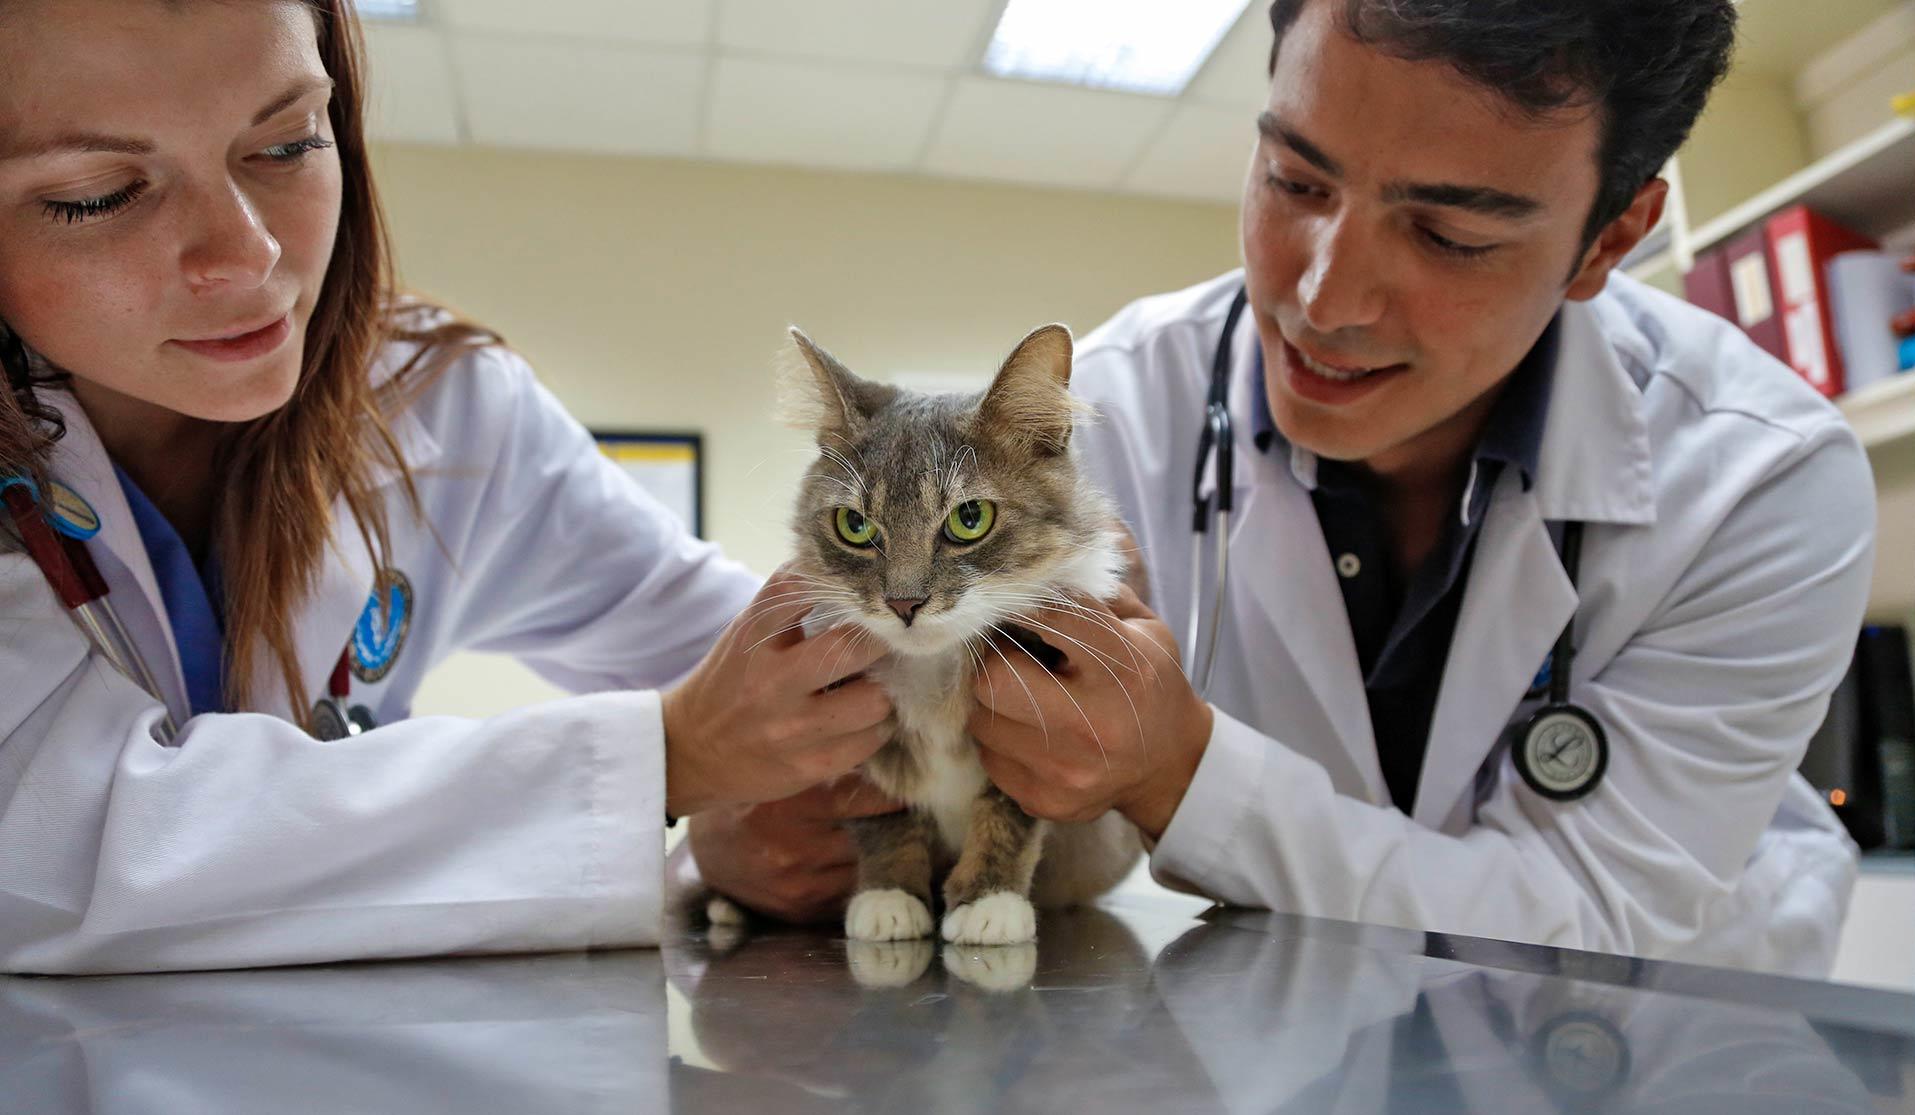 Awesome jobs that actually suck - doctor of veterinary medicine earned